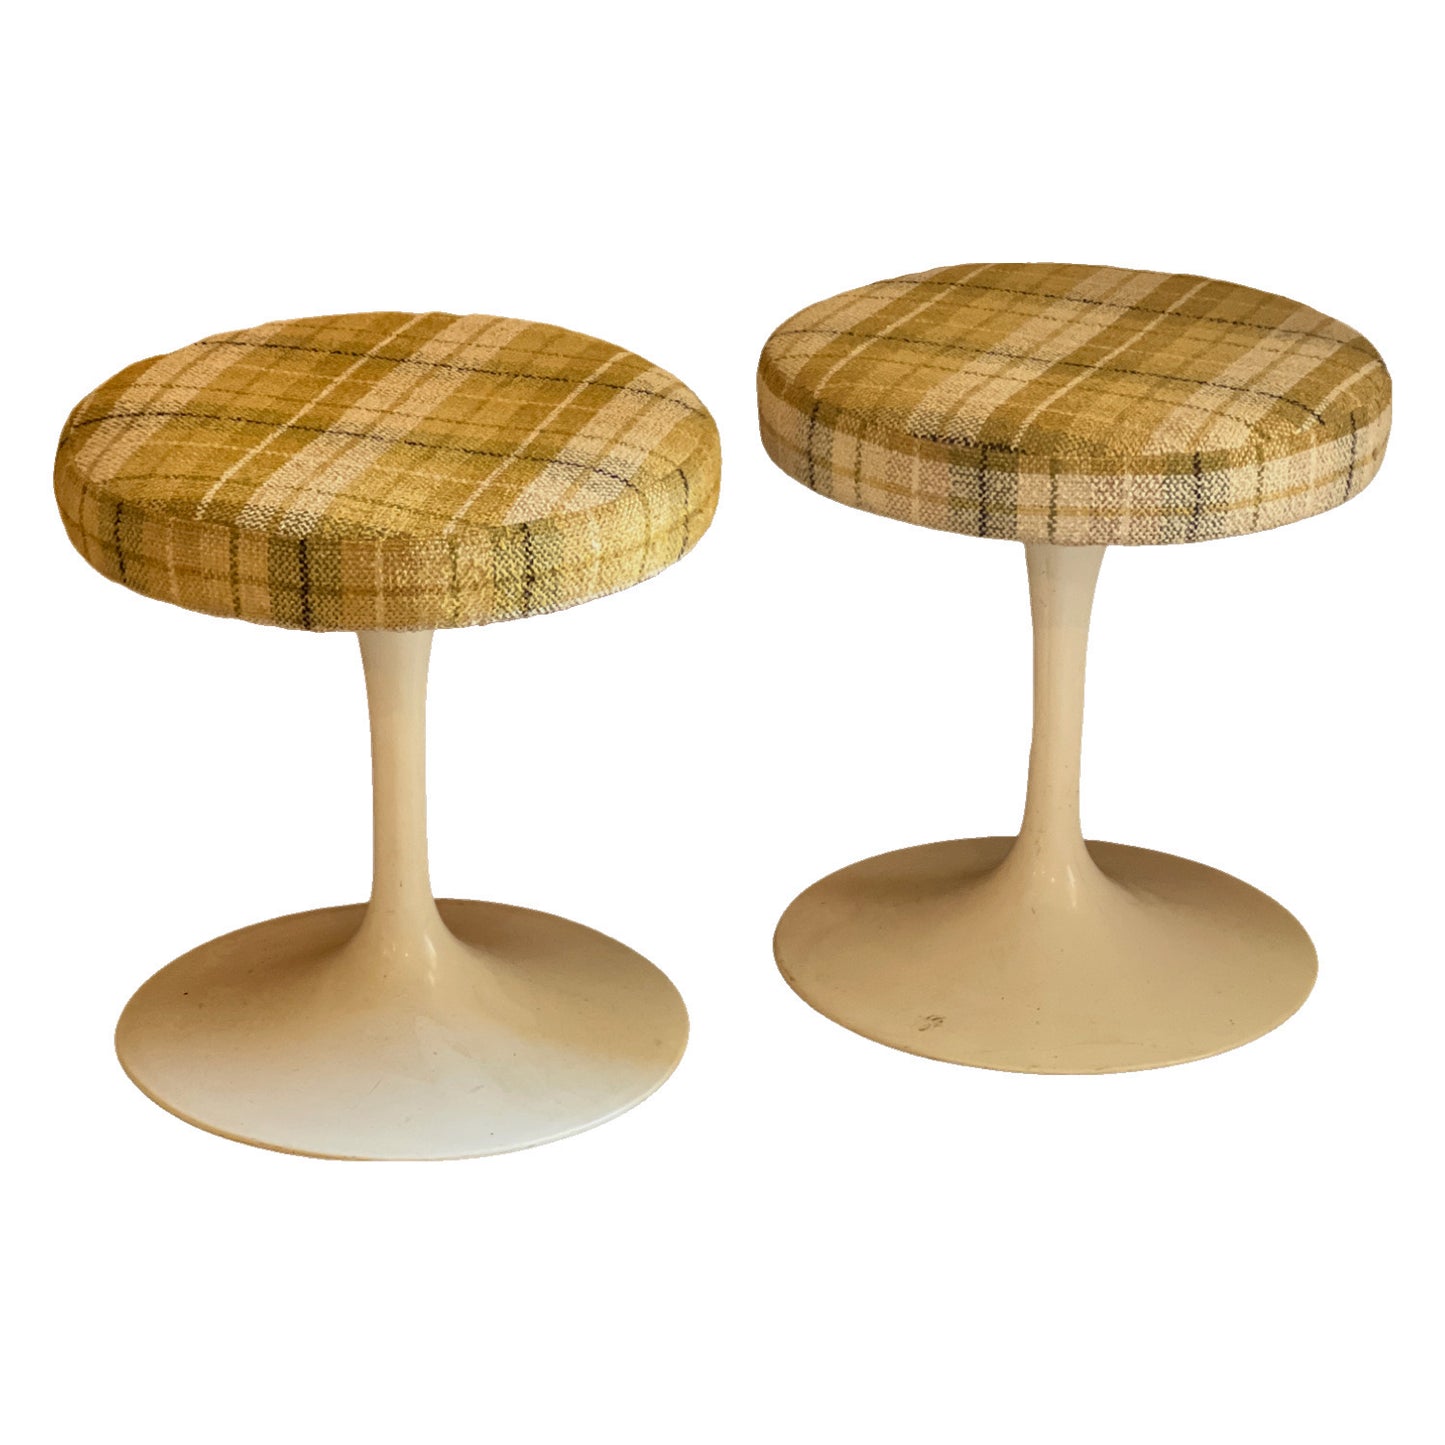 Vintage Pair of Tulip Stools with Green Plaid Upholstery